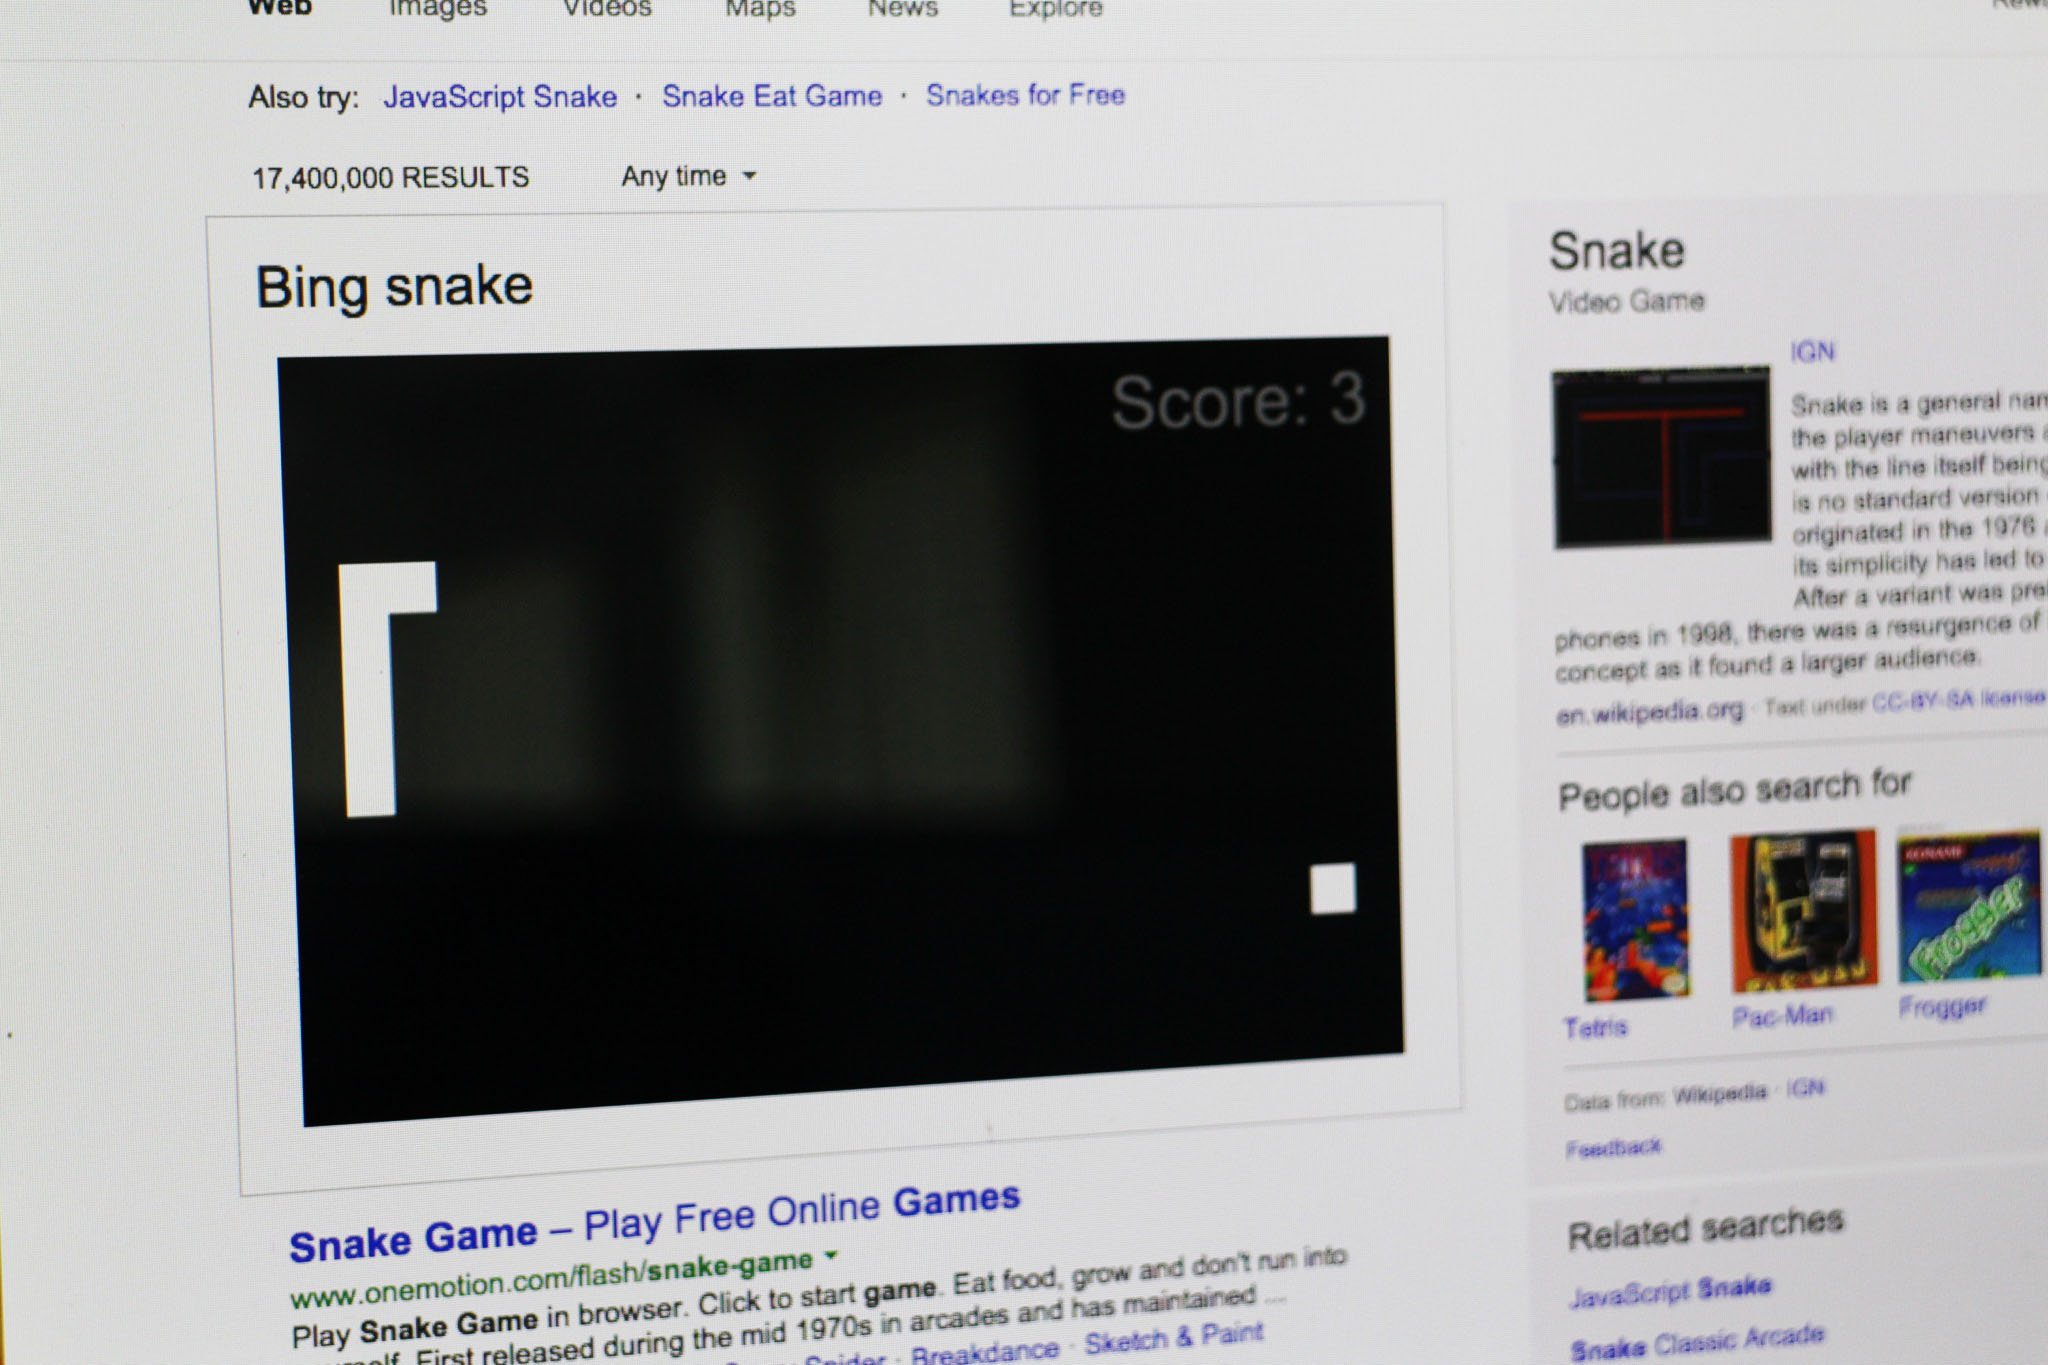 The classic Snake game is now playable directly in Bing search results | Windows Central1200 x 800